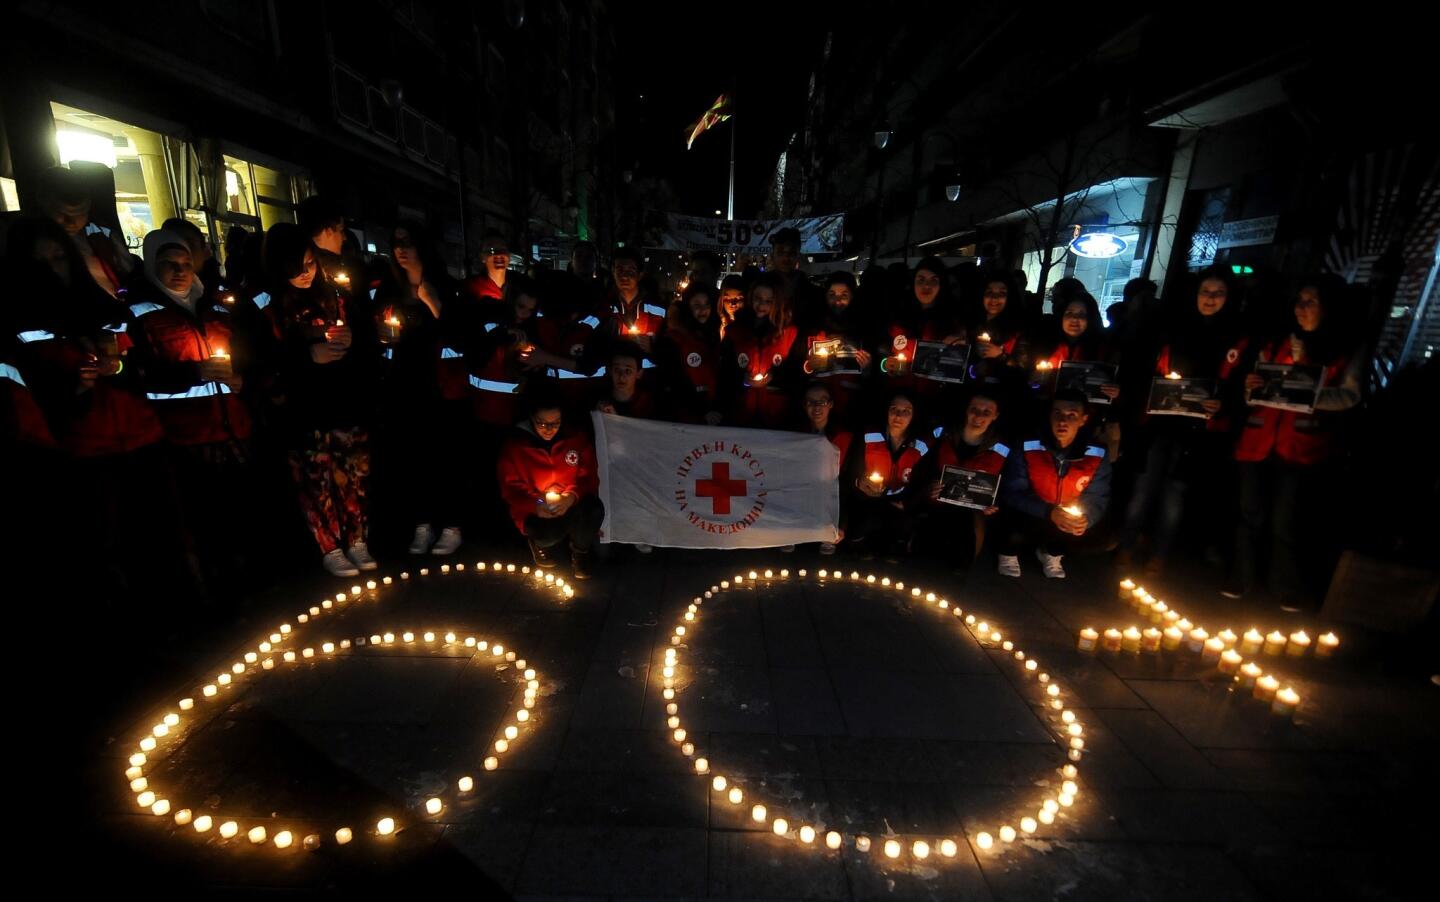 Activists of the Red Cross gather in front of lit candles forming the number "60" during "Earth Hour" in Skopje's main square on March 28, 2015.